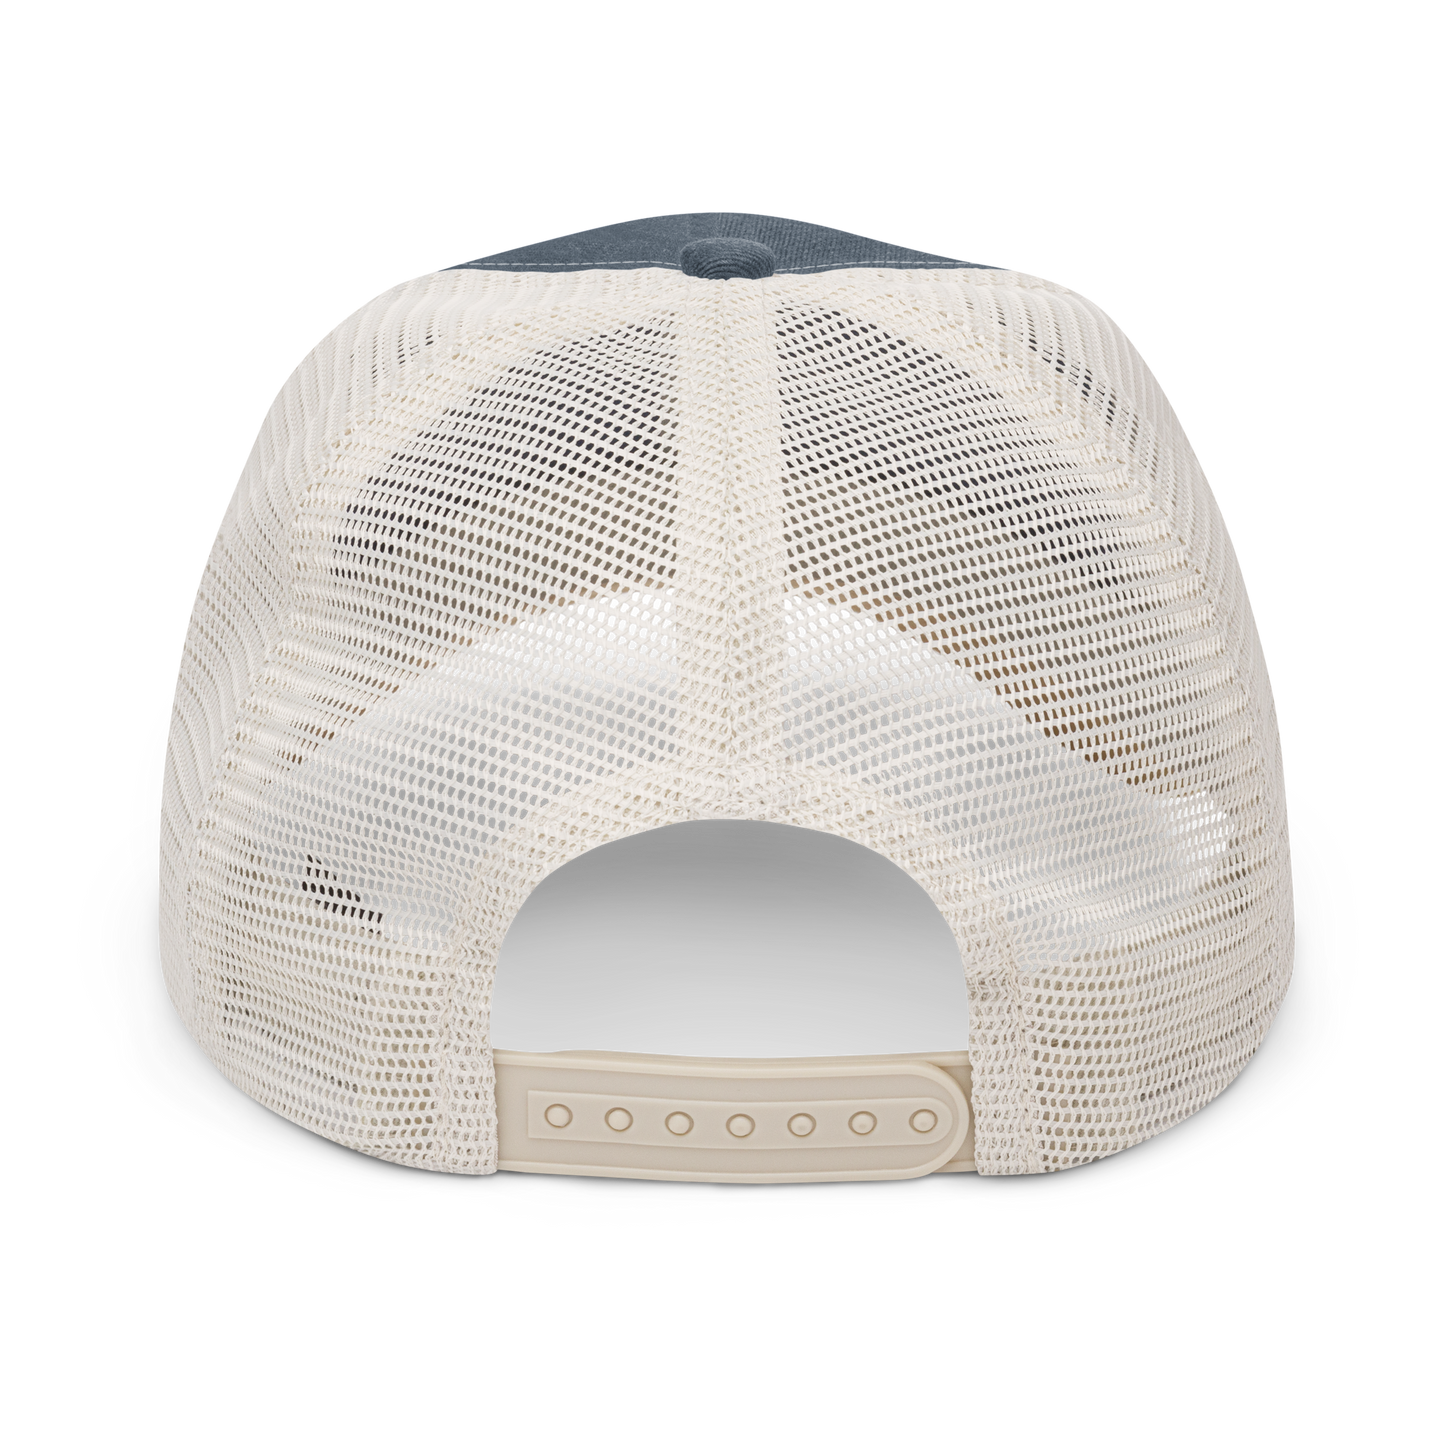 YHM Designs - YQG Windsor Pigment-Dyed Trucker Cap - Crossed-X Design with Airport Code and Vintage Propliner - White Embroidery - Image 14